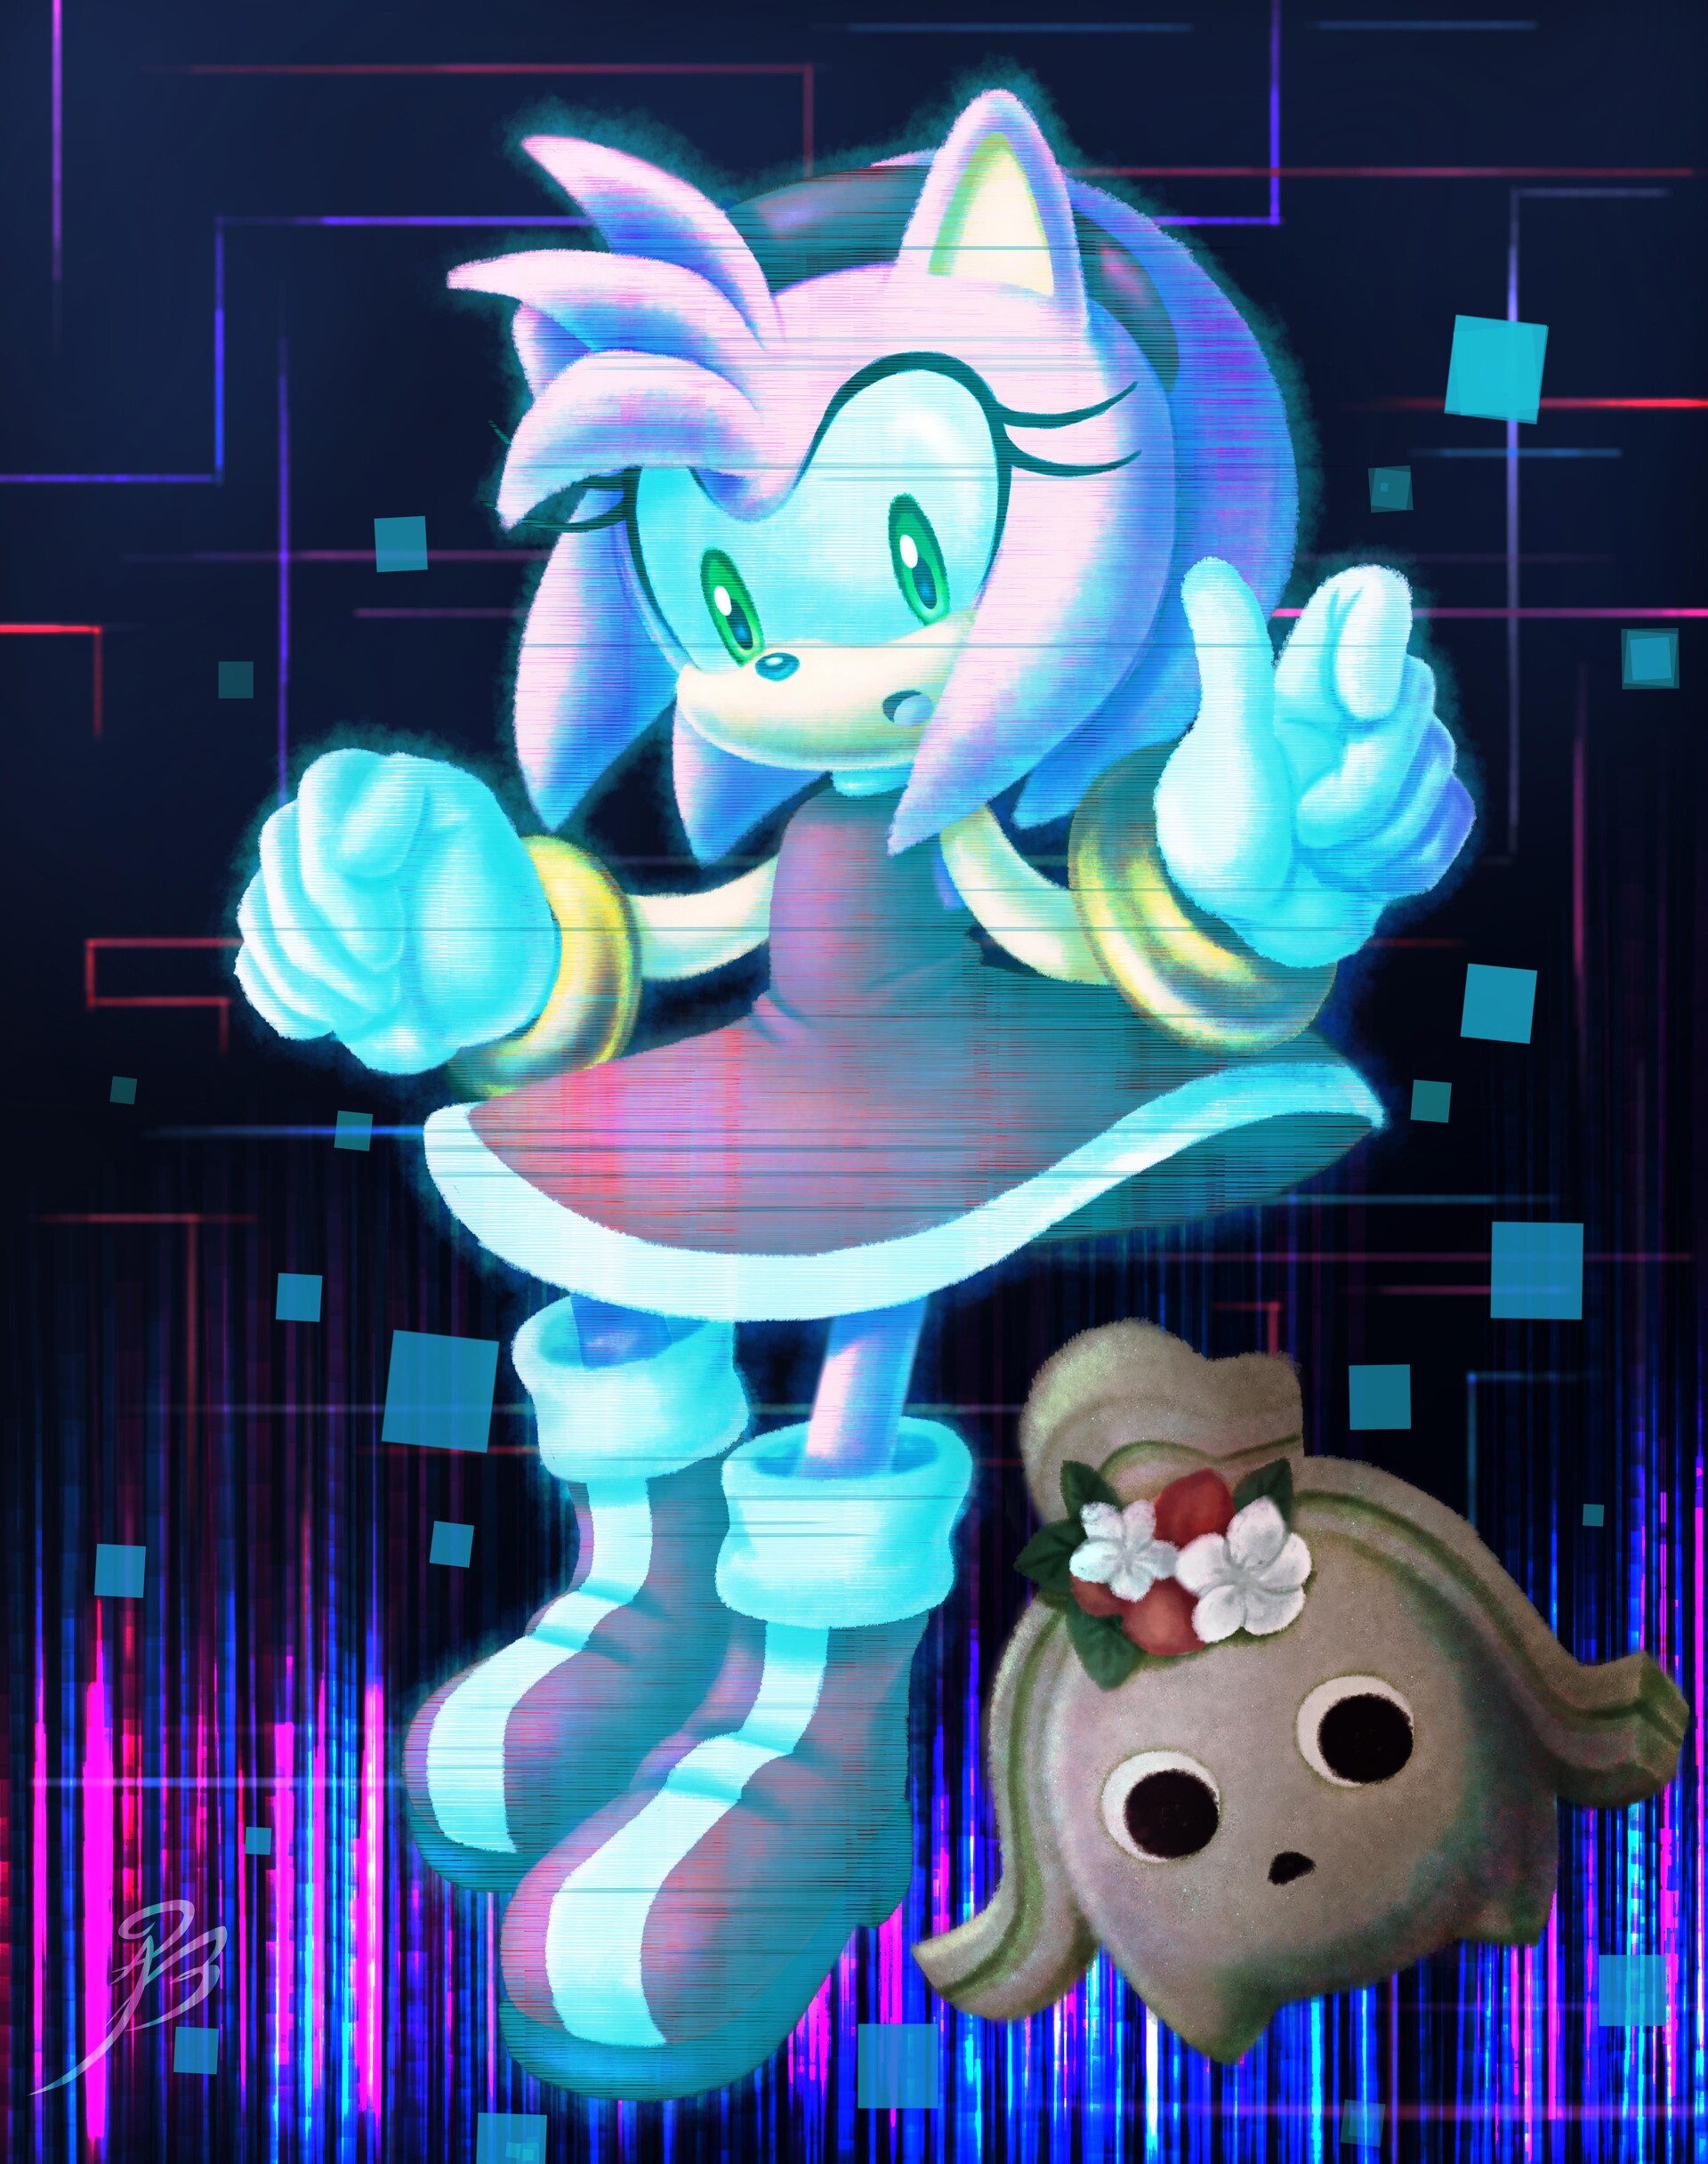 How To Free Amy In Sonic Frontiers